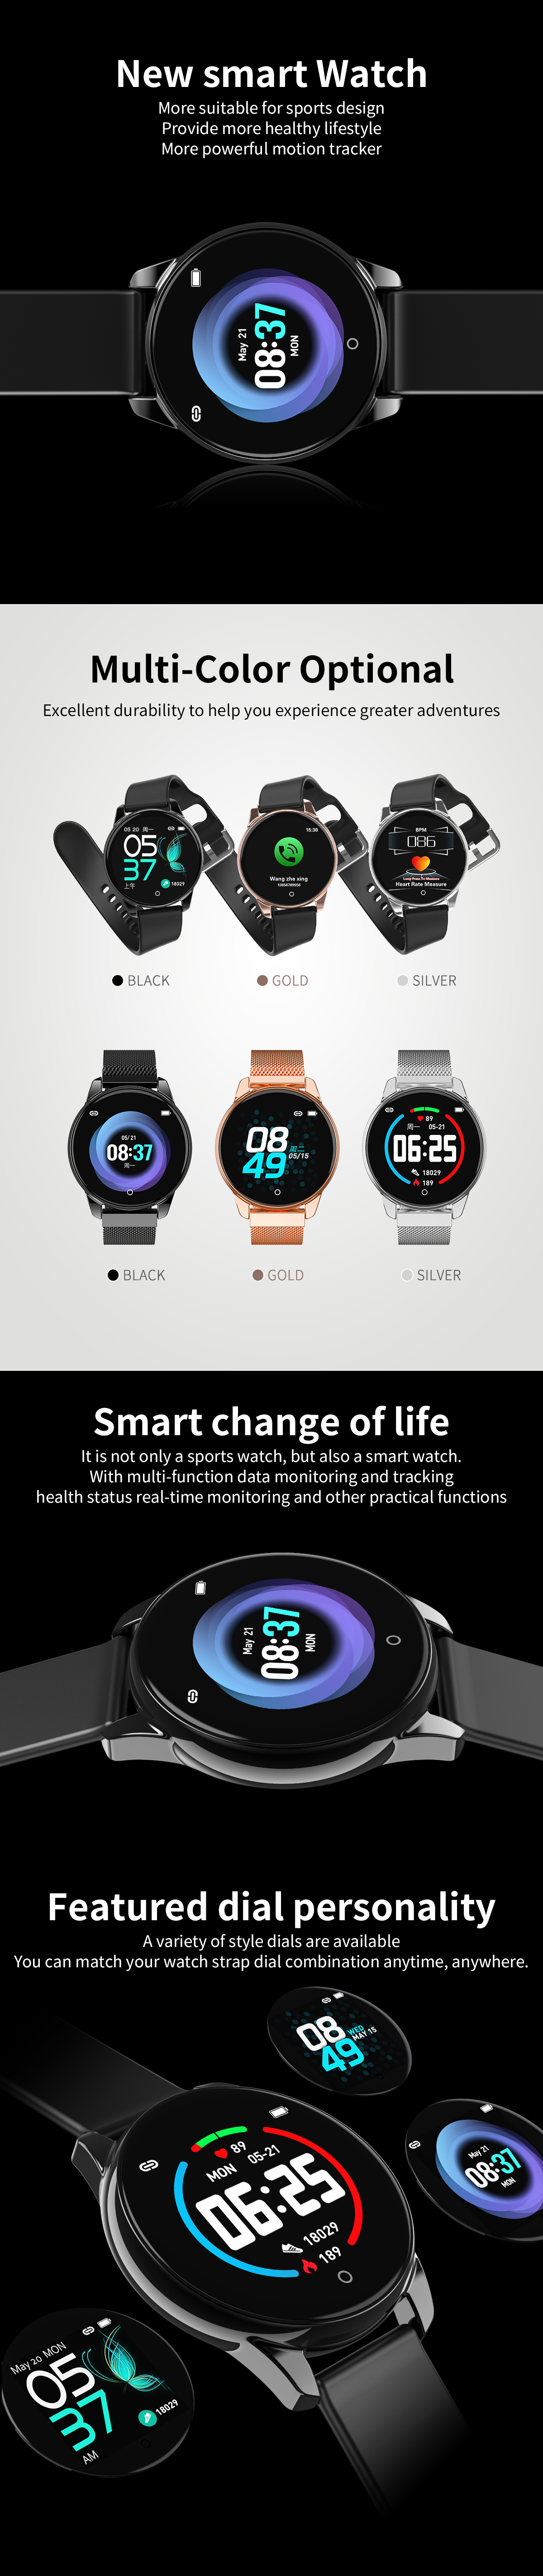 Bakeey-HD-Color-Screen-24-hour-HR-Blood-Pressure-Monitor-Remote-Camera-Business-Style-Smart-Watch-1539174